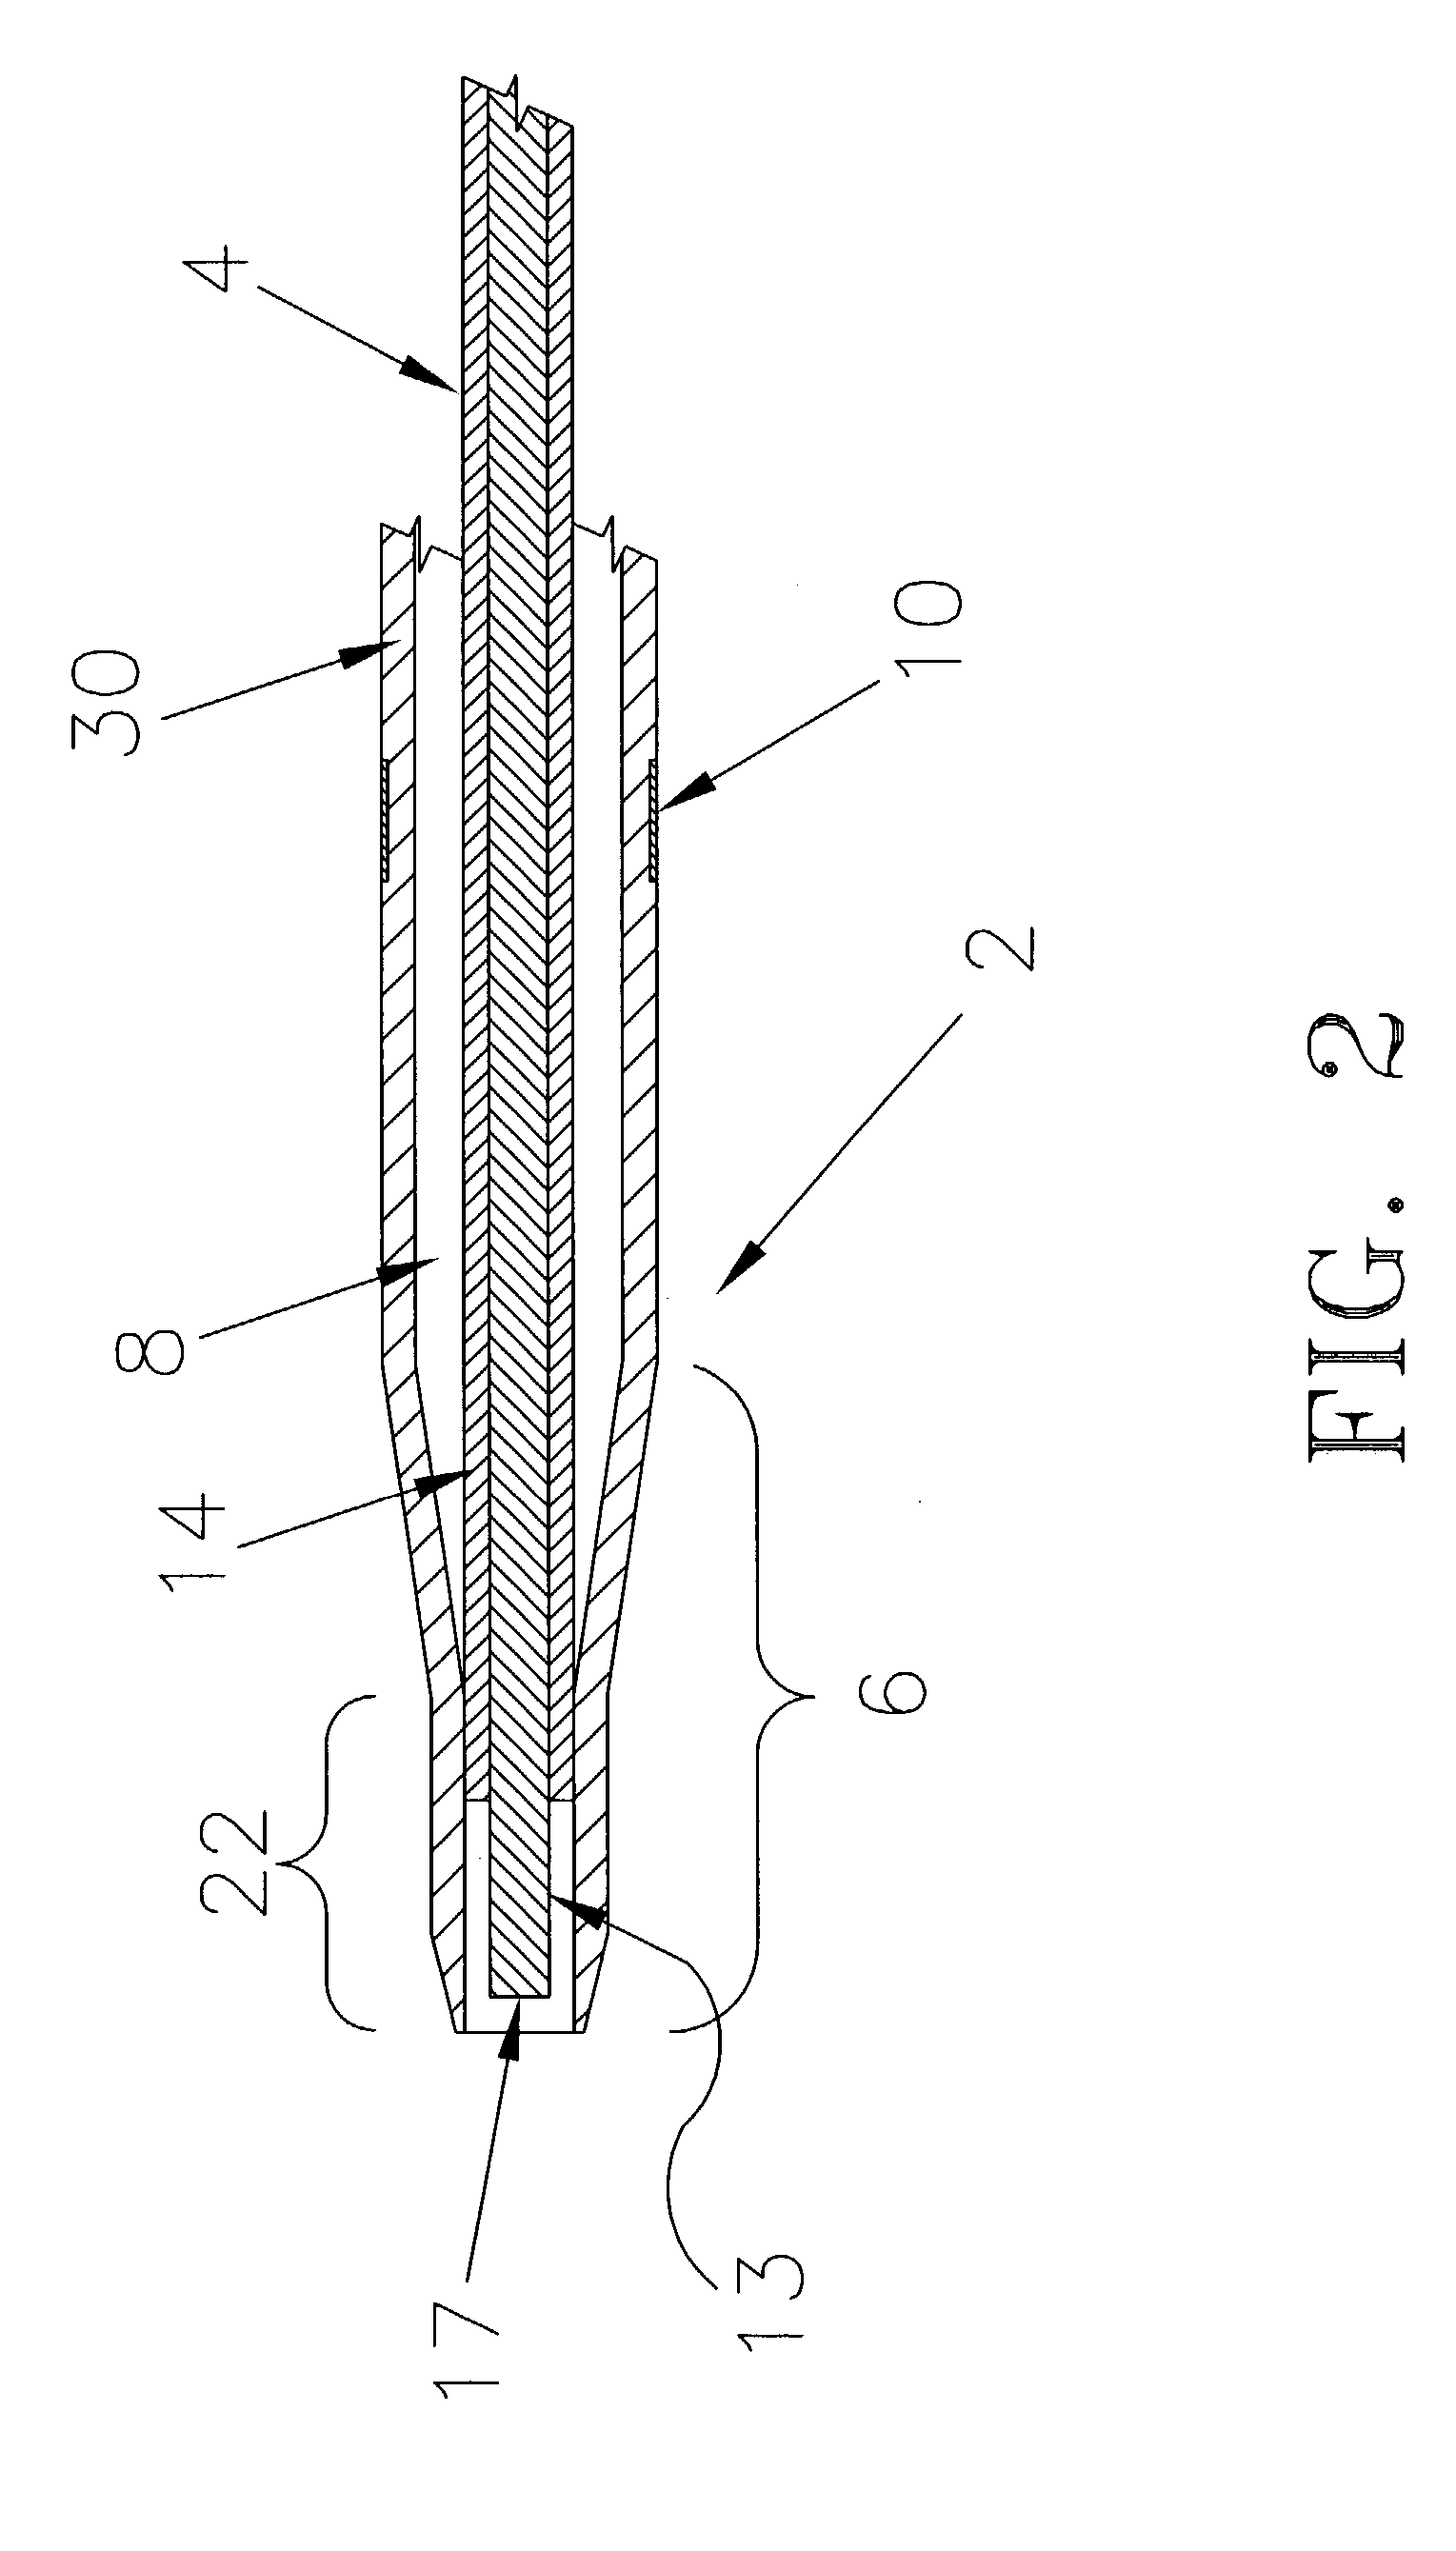 Vascular treatment device and method